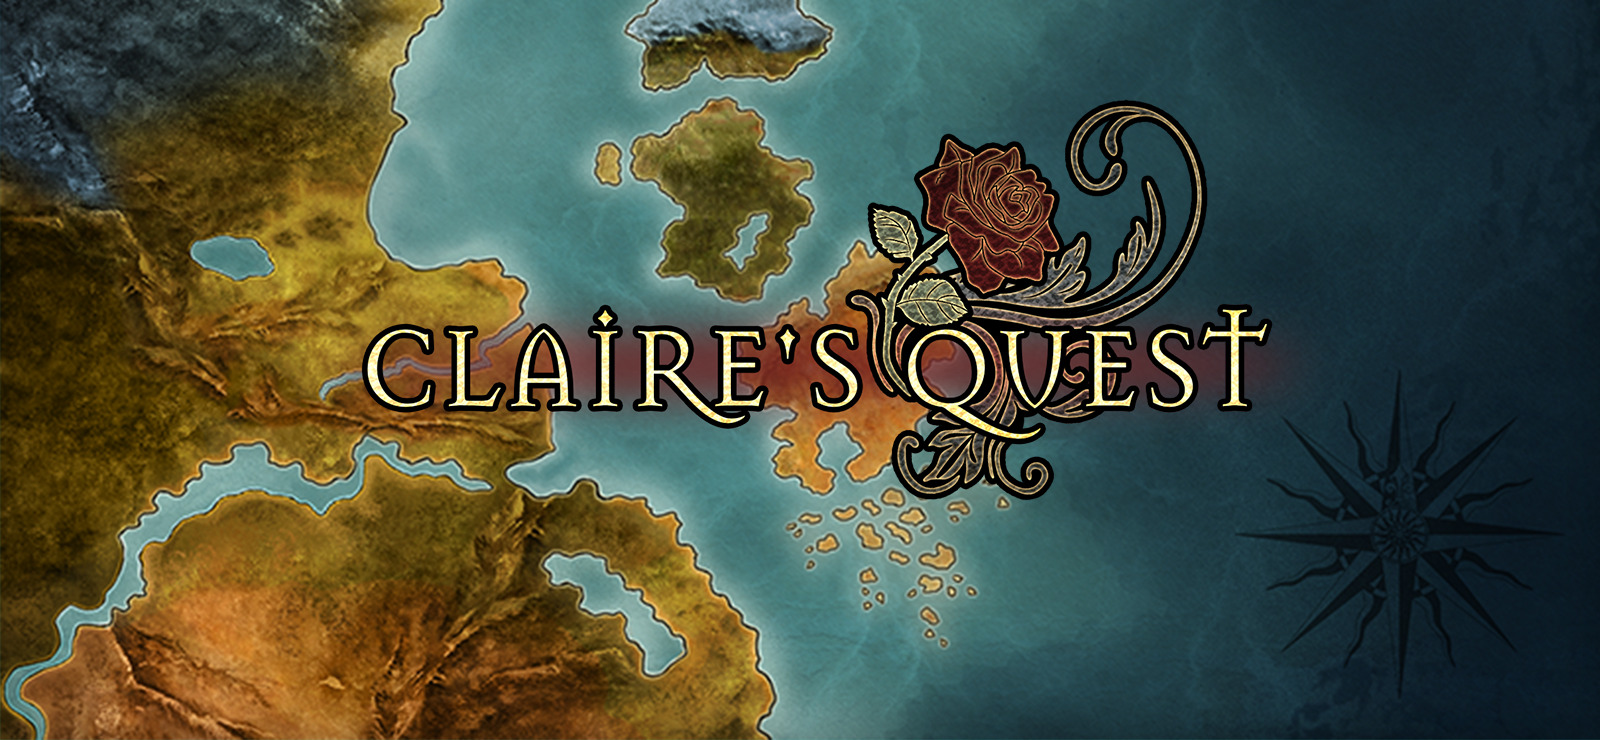 Claire's quest game download